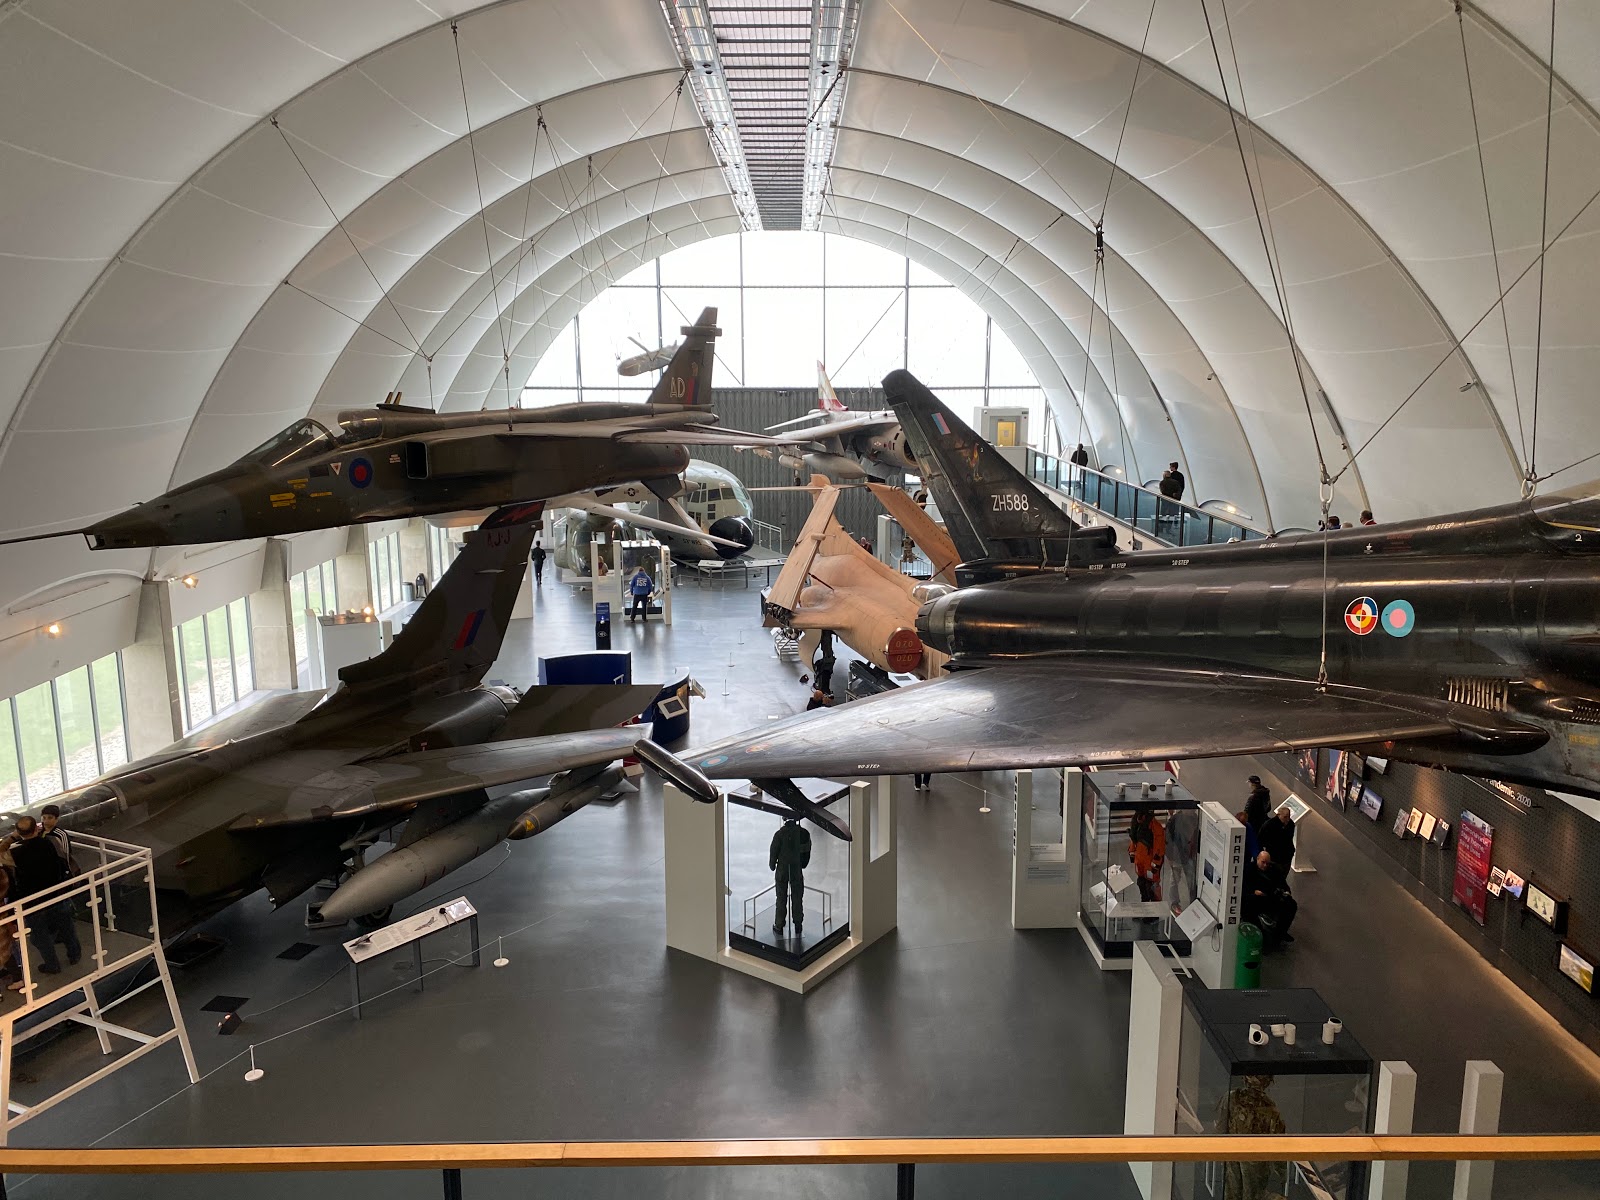 https://whatremovals.co.uk/wp-content/uploads/2022/02/Royal Air Force Museum London-300x225.jpeg